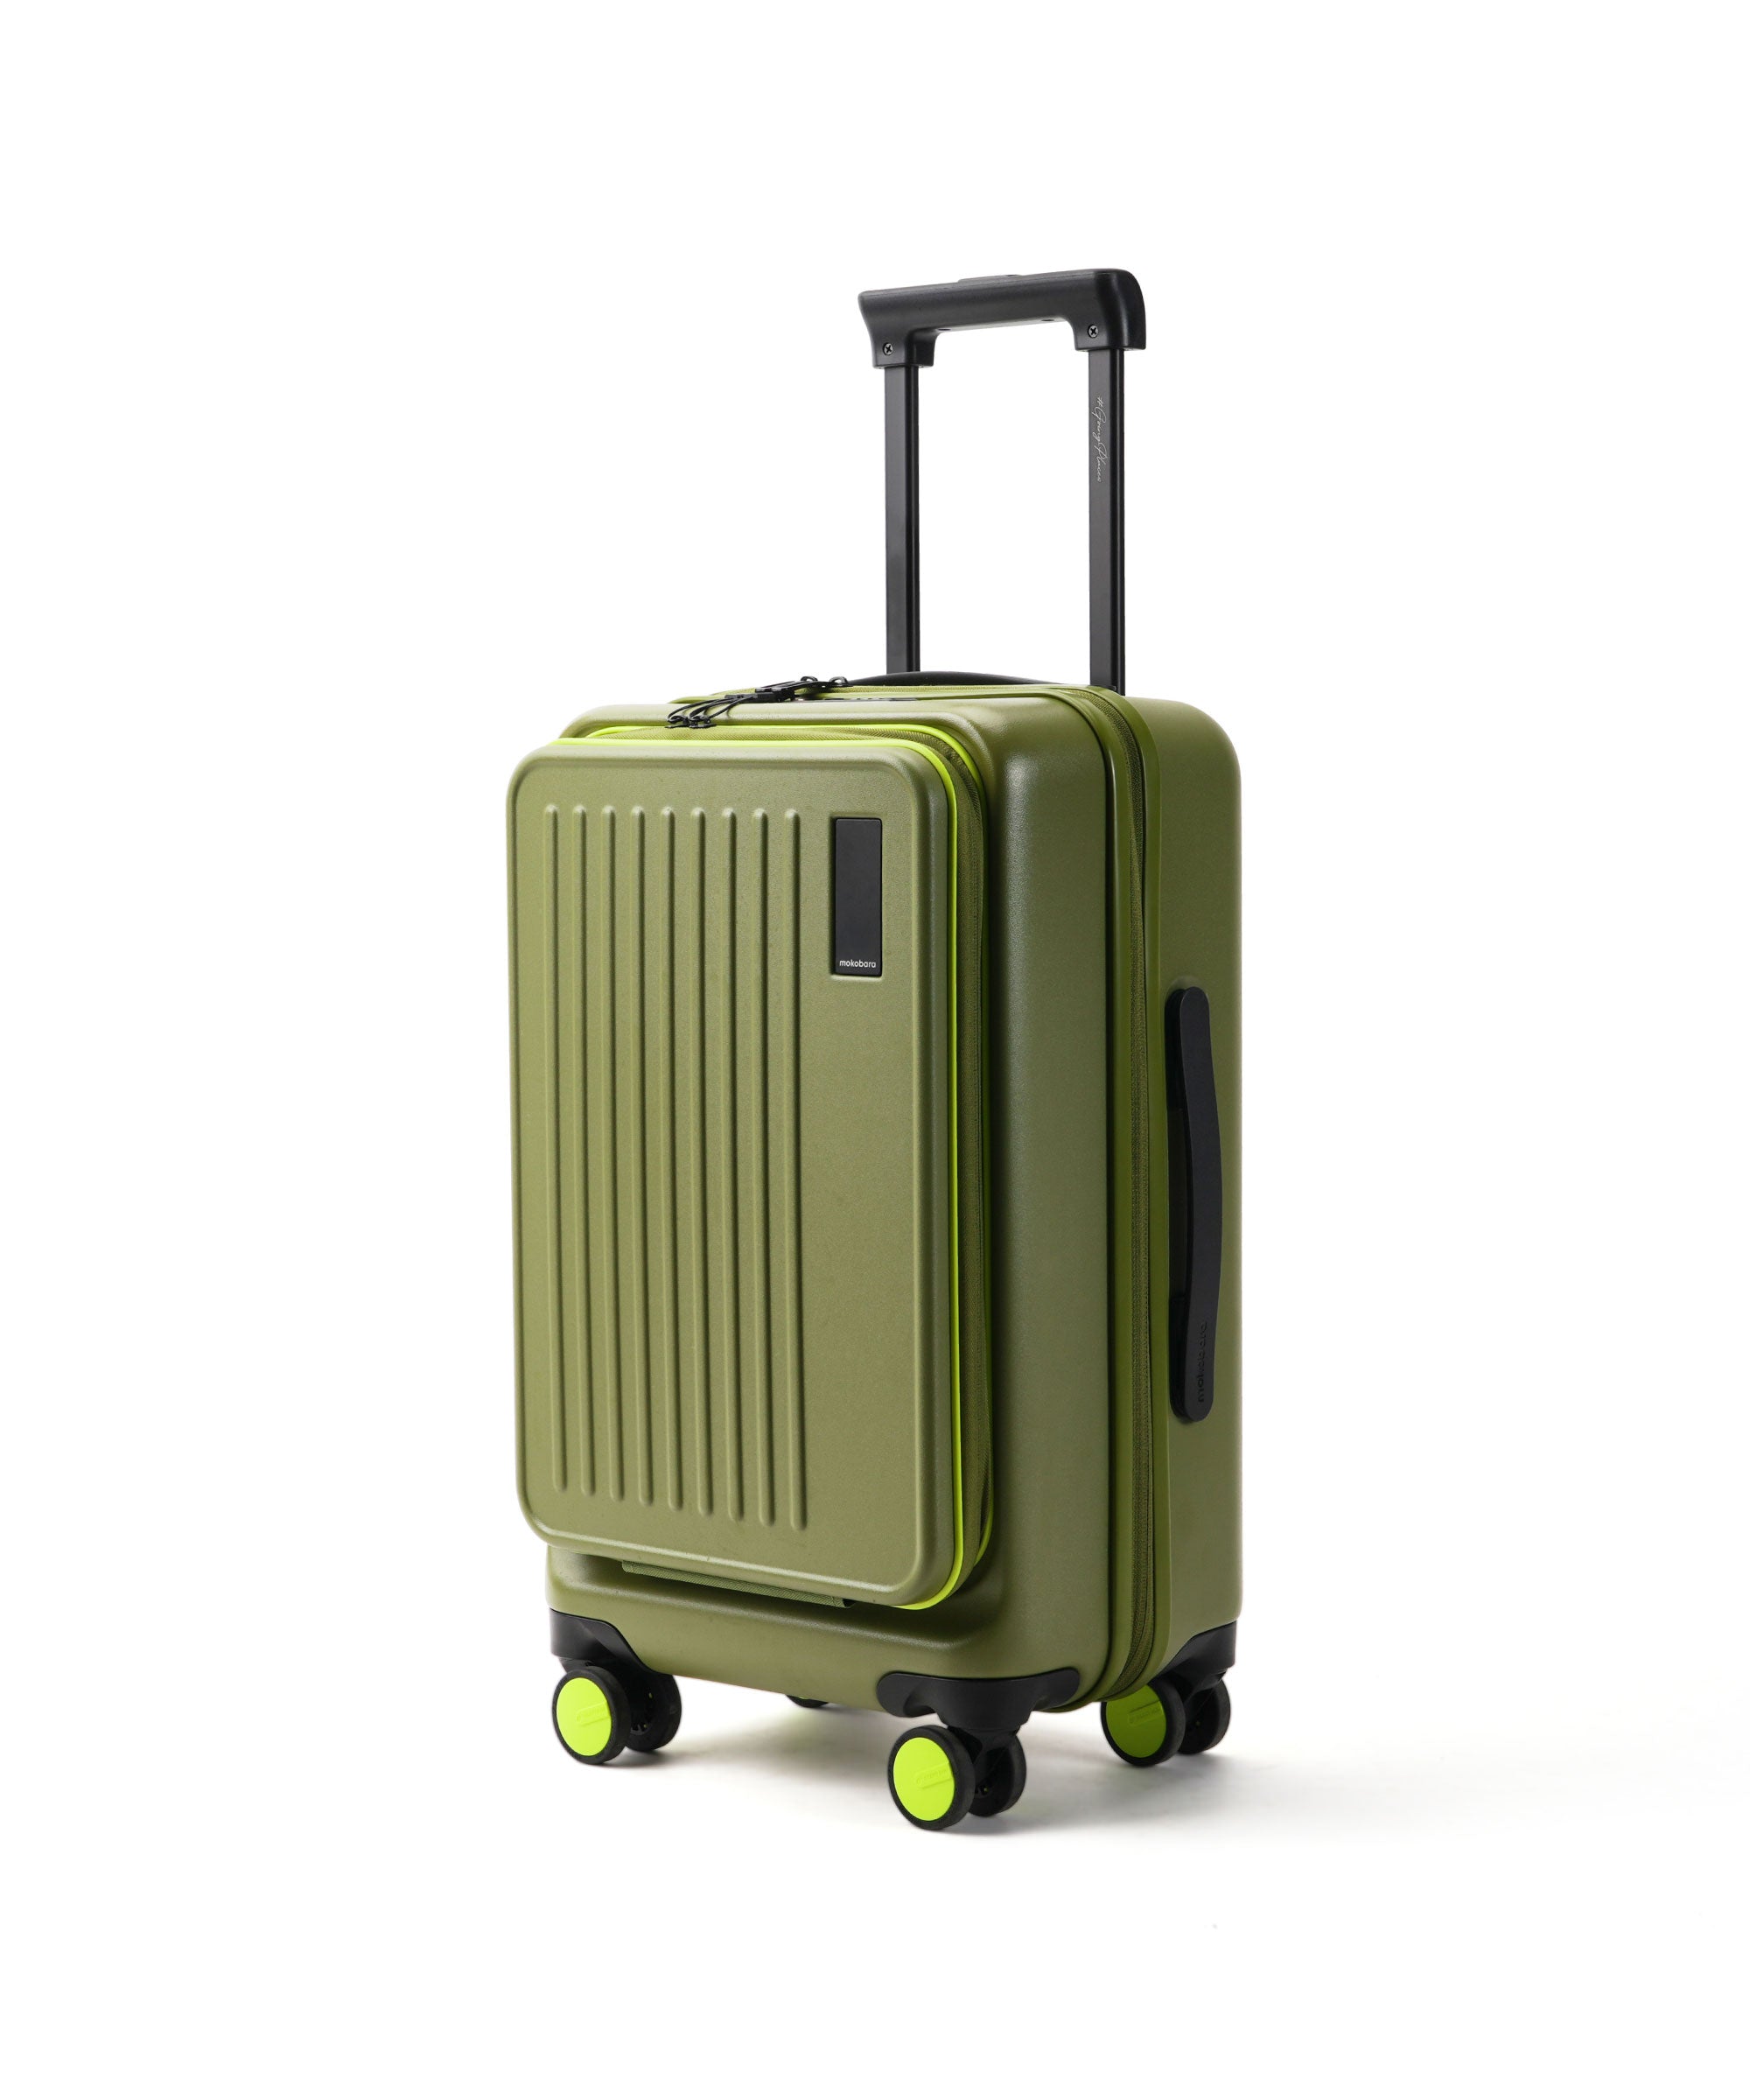 Color_So Matcha Limeray (Limited Edition) | The Transit Cabin Pro